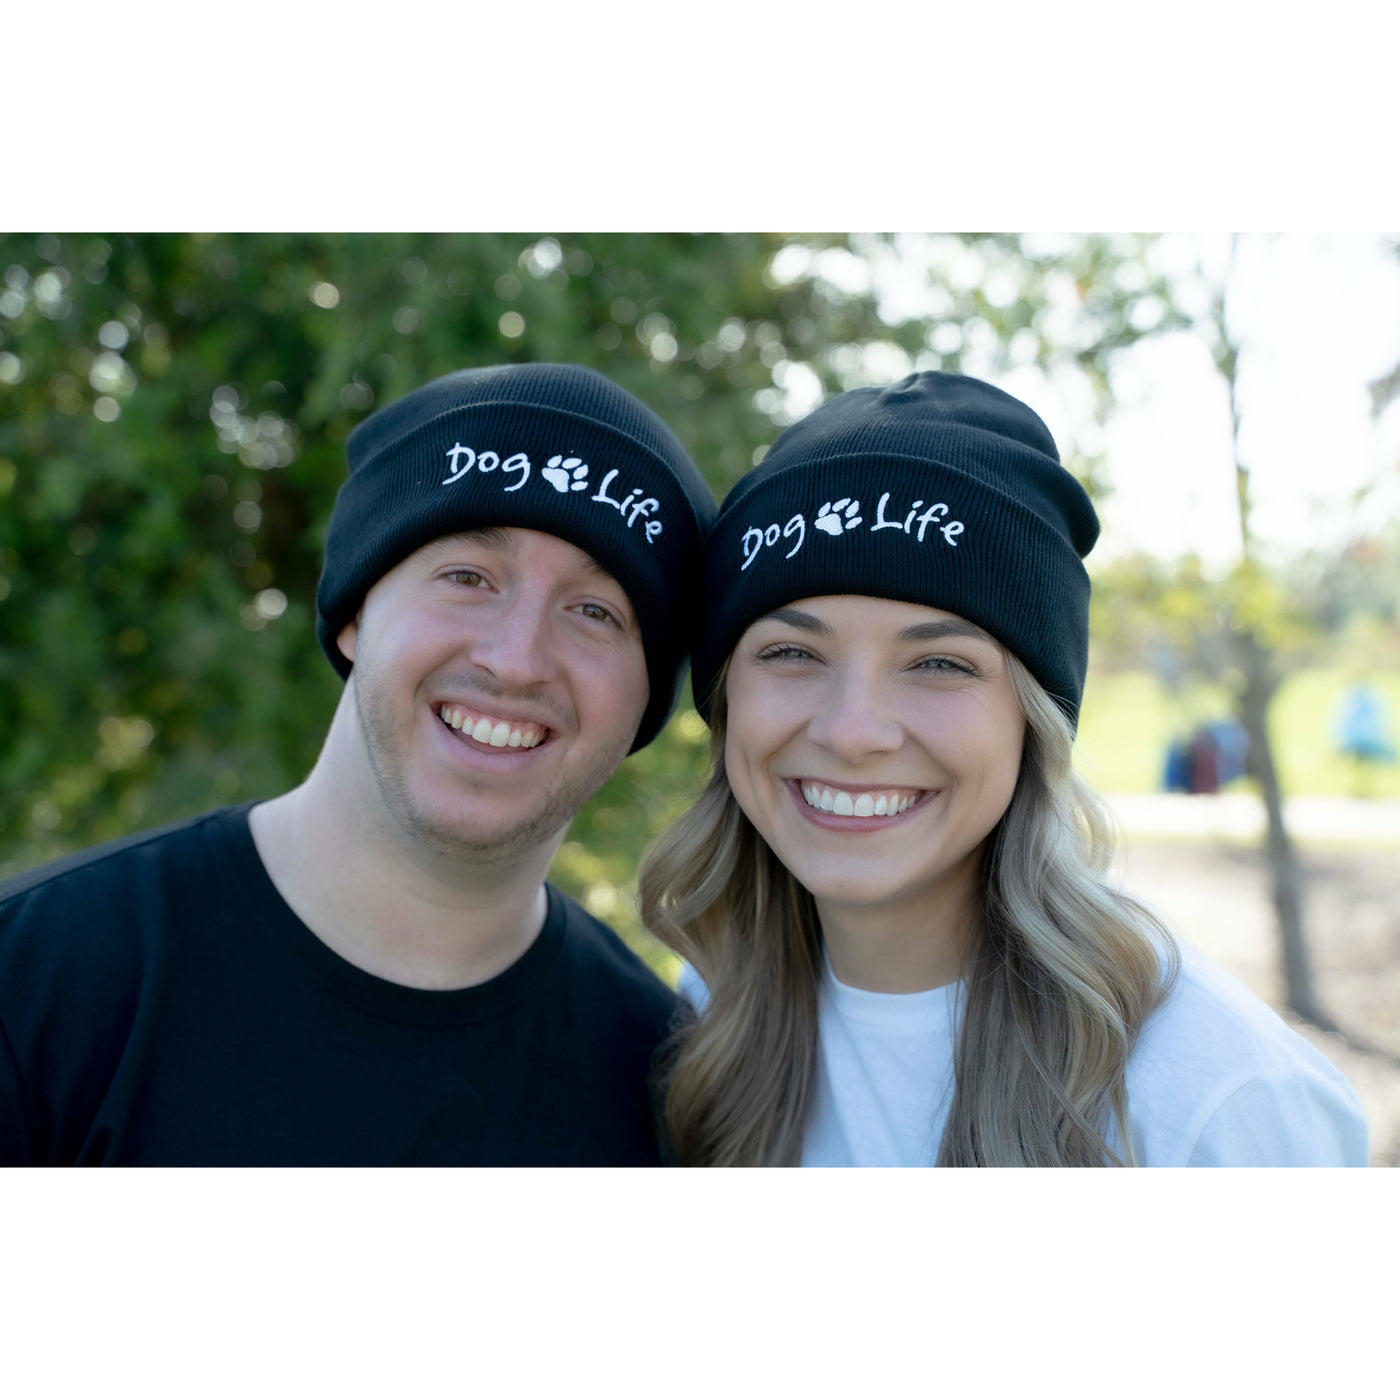 Smiling young man and woman wearing Dog Life beanies.  Dog Life apparel